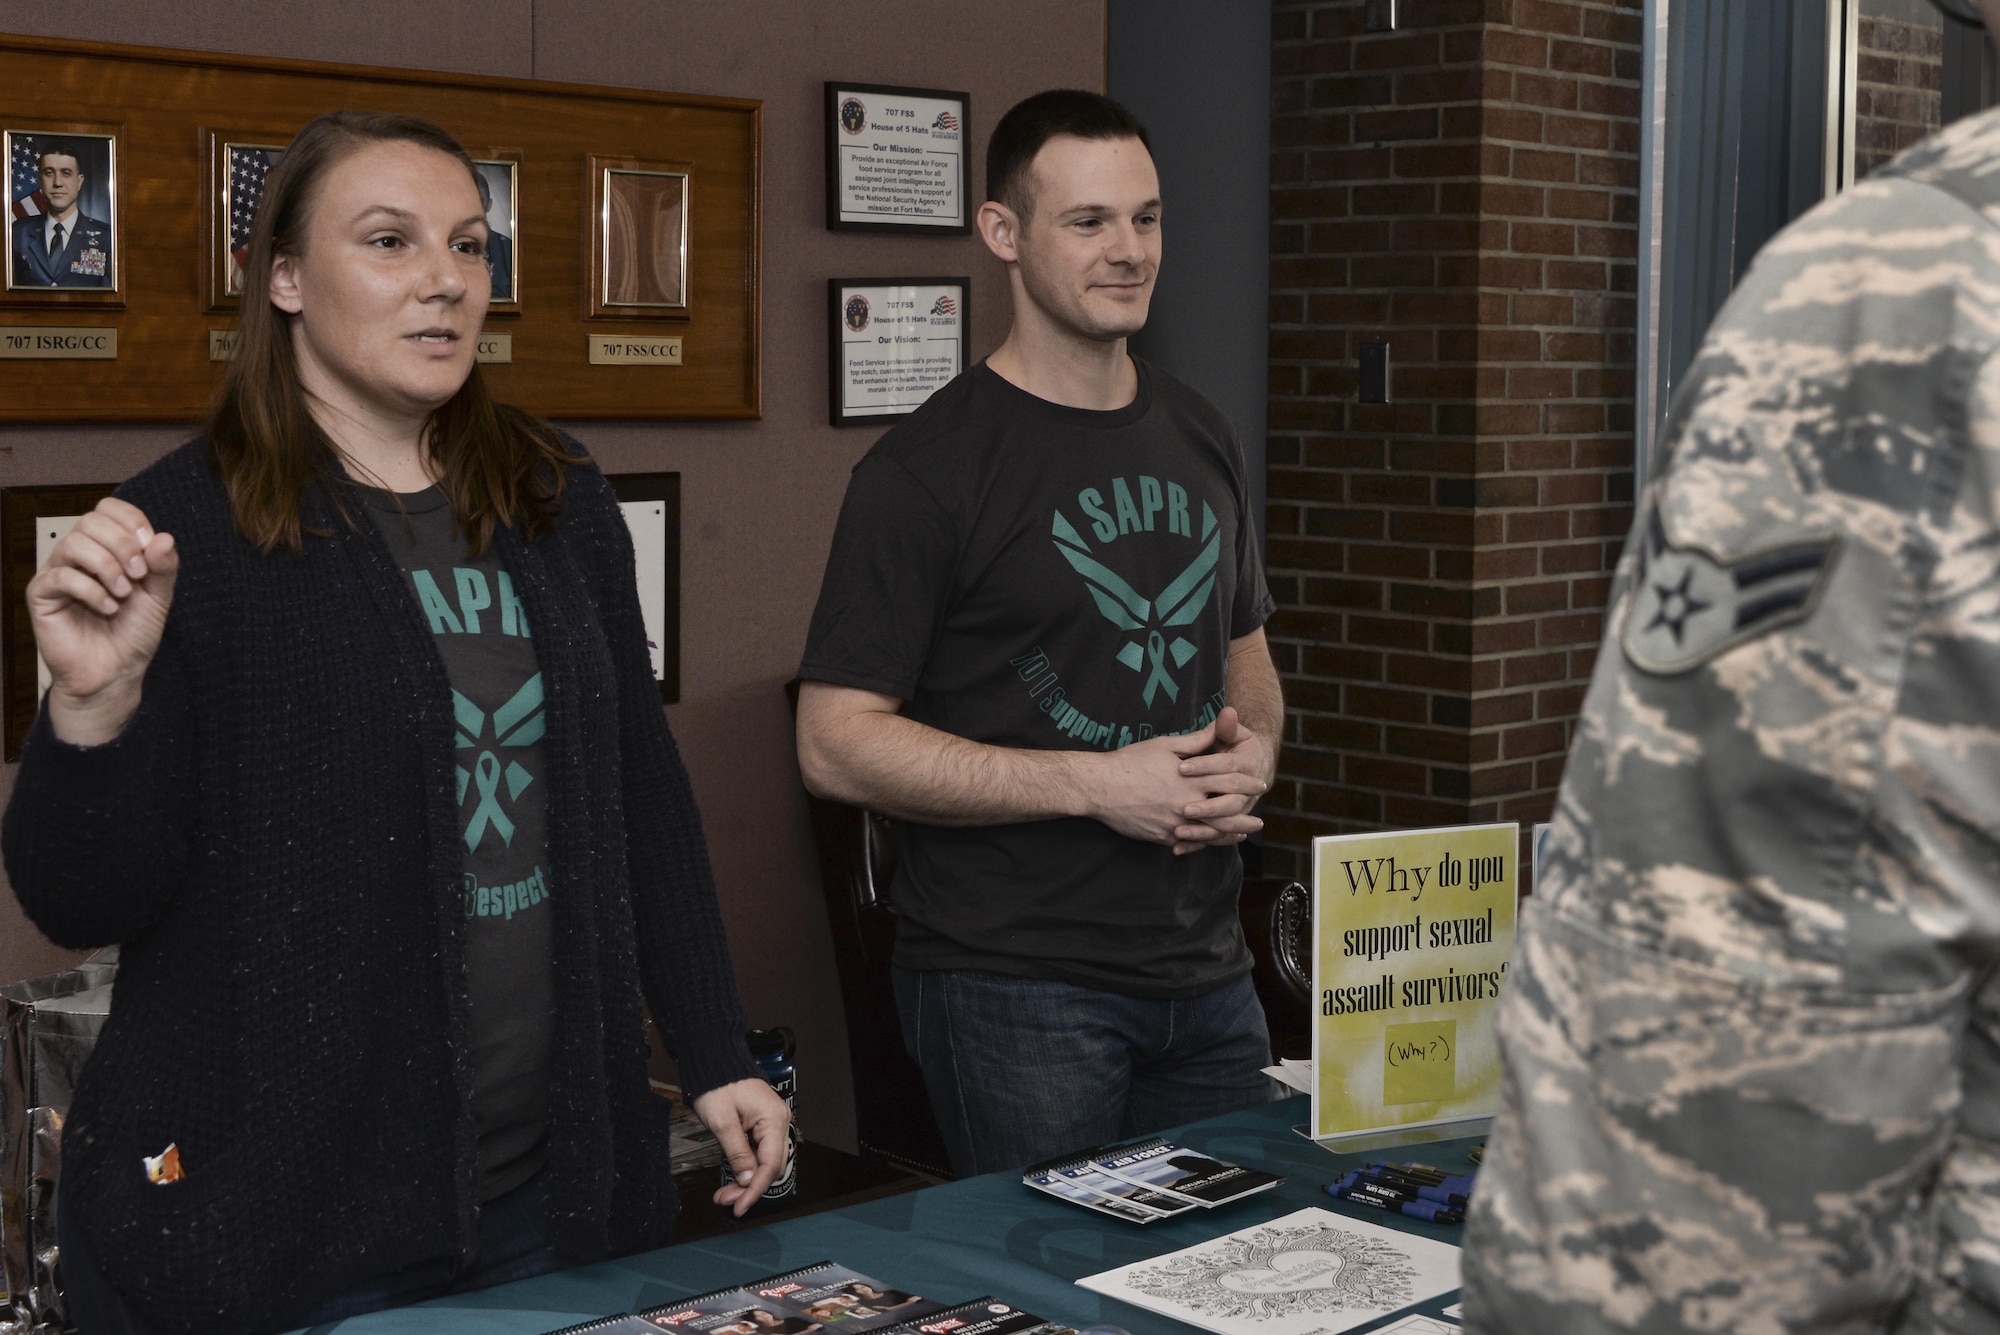 Staff Sgt. Melissa and Capt. Robert, 7th Intelligence Squadron volunteer victim advocates, talk to 70th Intelligence, Surveillance and Reconnaissance Wing Airmen about the Stick with Survivors project April 13. Stick with Survivors is a project created by the 70th ISRW Sexual Assault Prevention and Response office that will assist military and civilian members in showing their support for sexual assault survivors. (U.S. Air Force photo by Staff Sgt. Alexandre Montes)